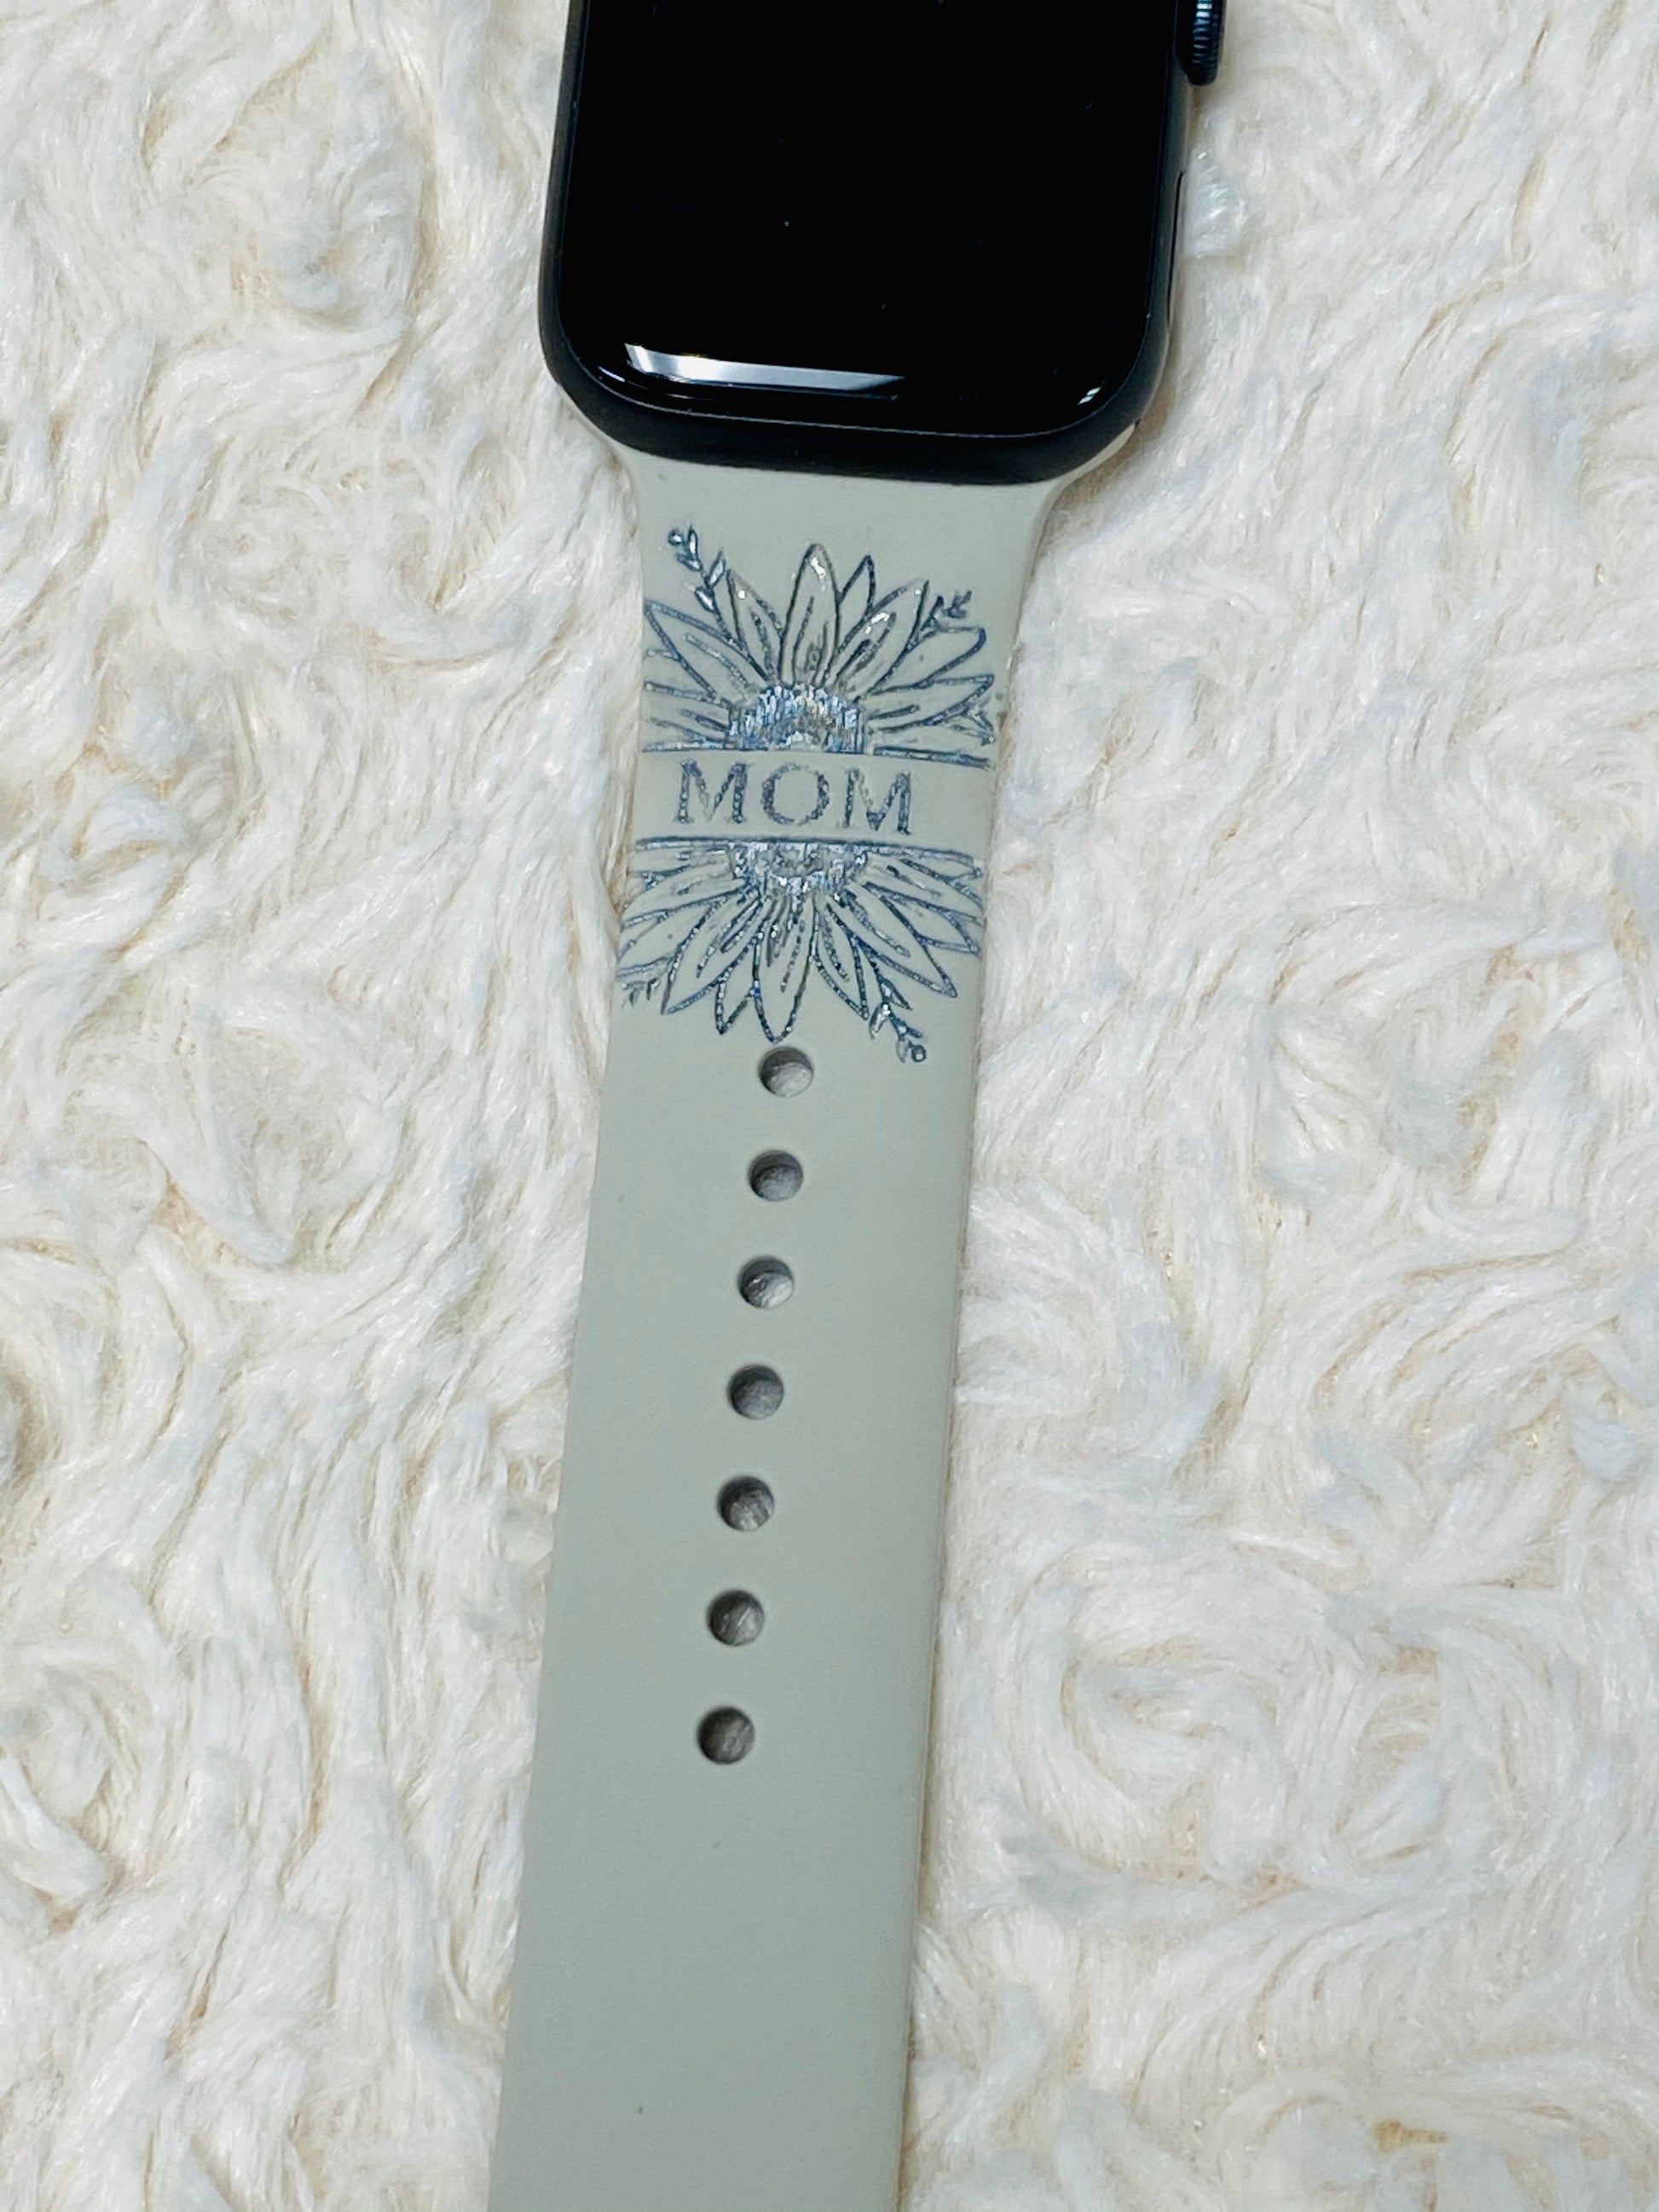 Personalized Apple Watch Band. Monogram Only - Bair Prints